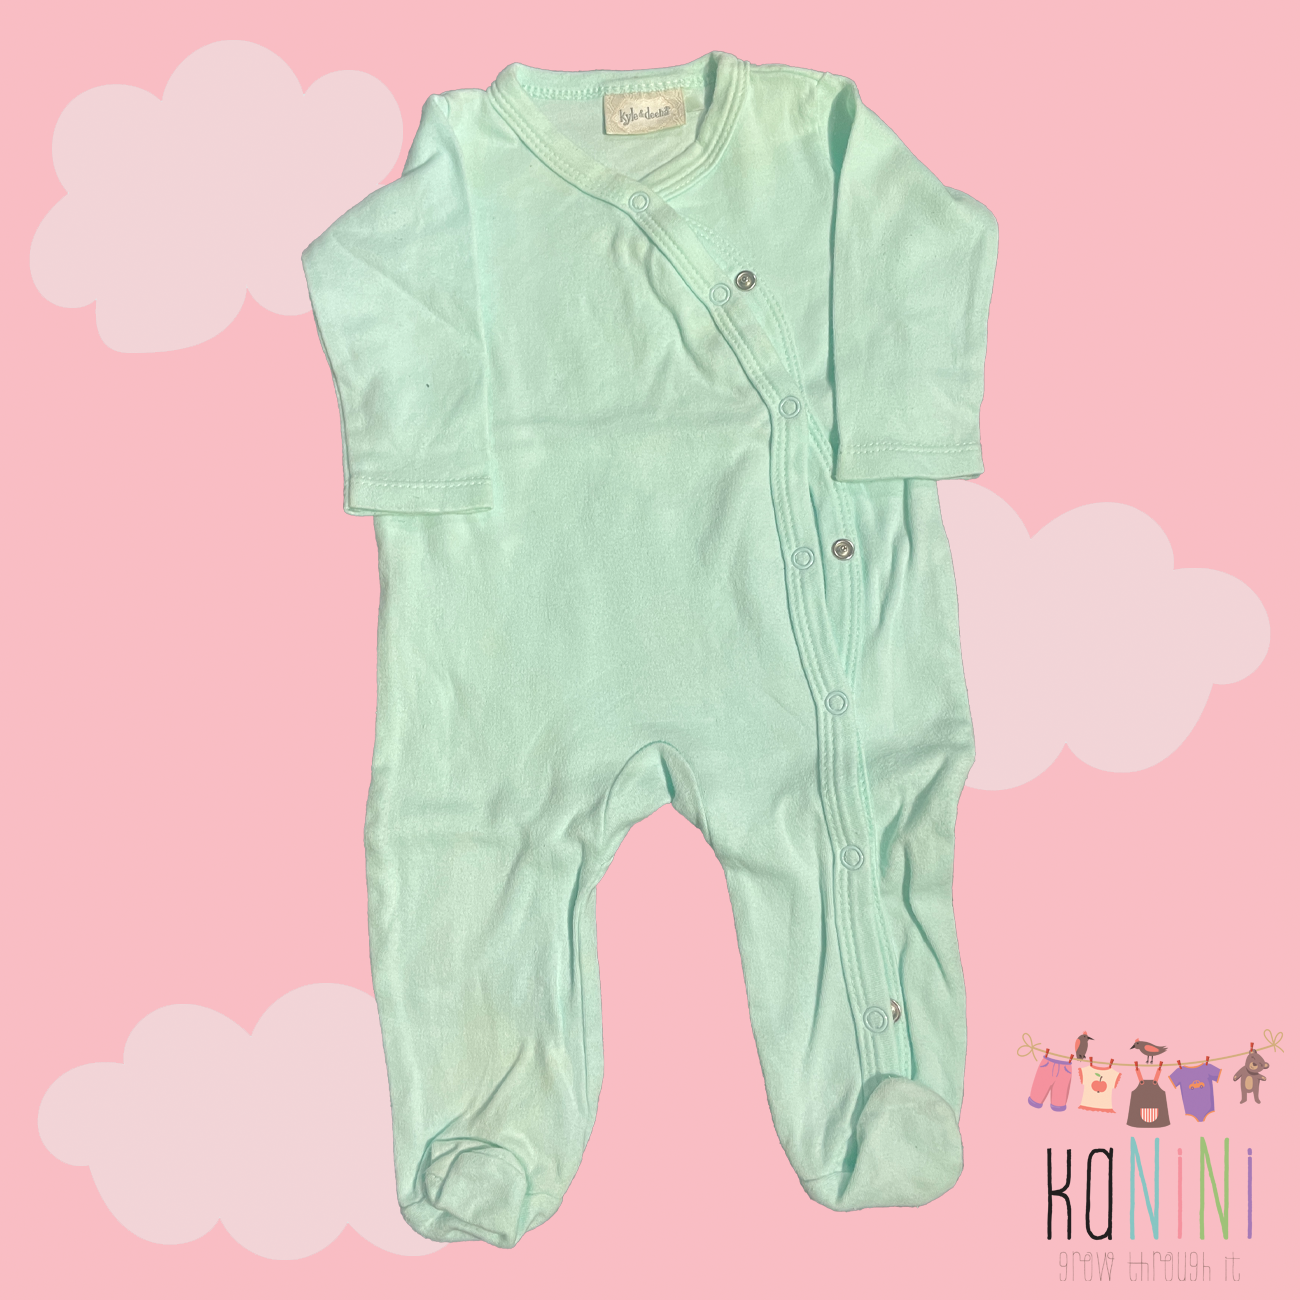 Featured image for “Kyle & Deena 0 - 3 Months Girls Turquoise Babygrow”